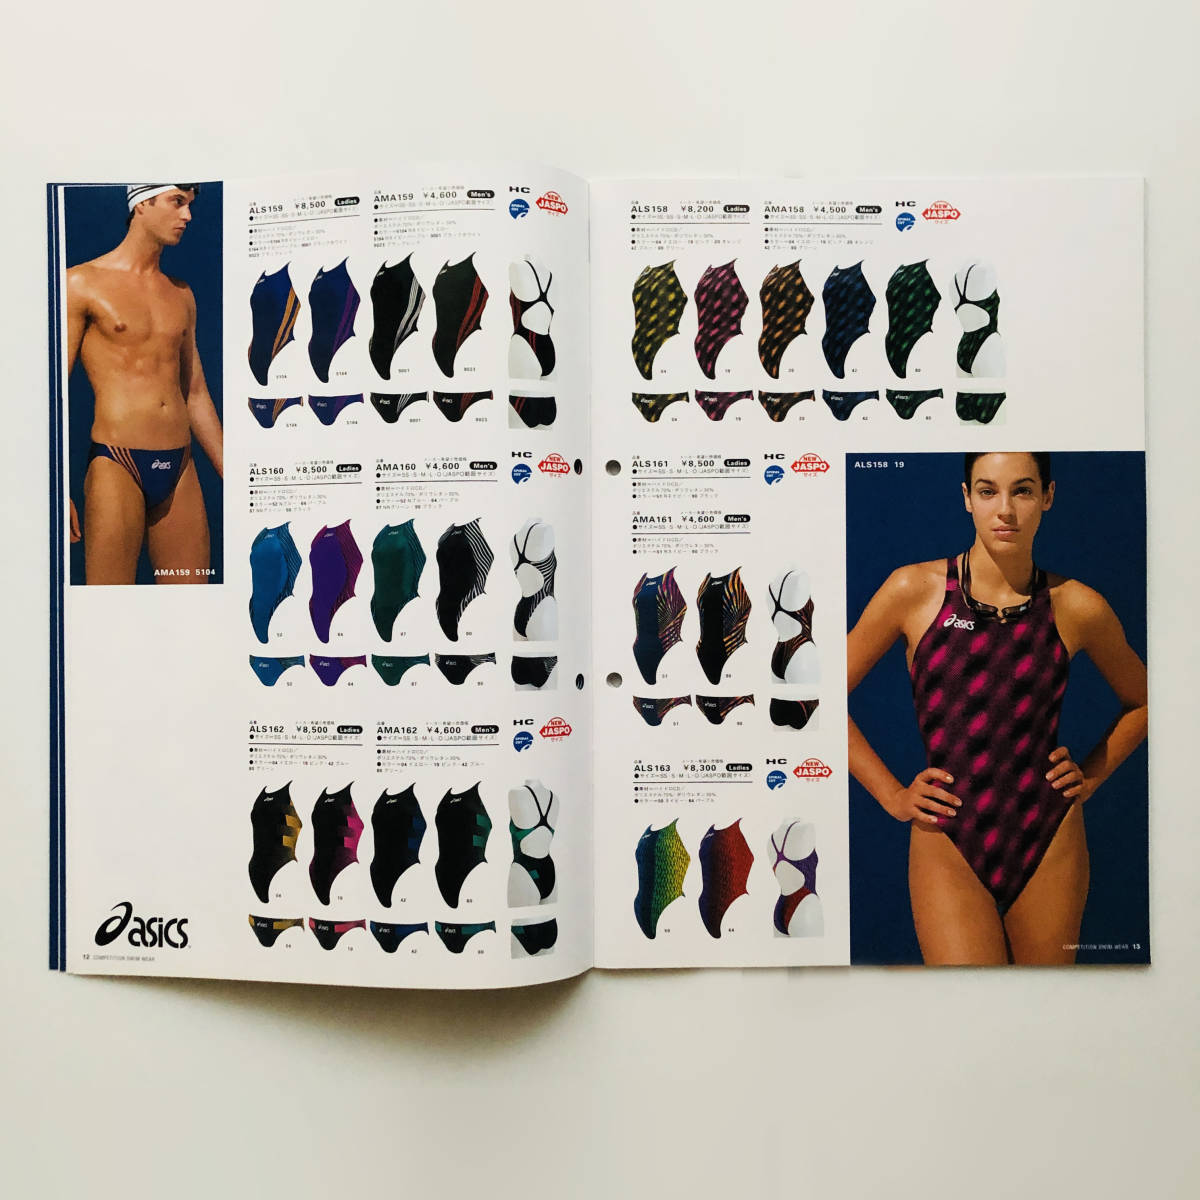 asics／ASICS SWIM WEAR 1998 collection for competitors／1998年版 